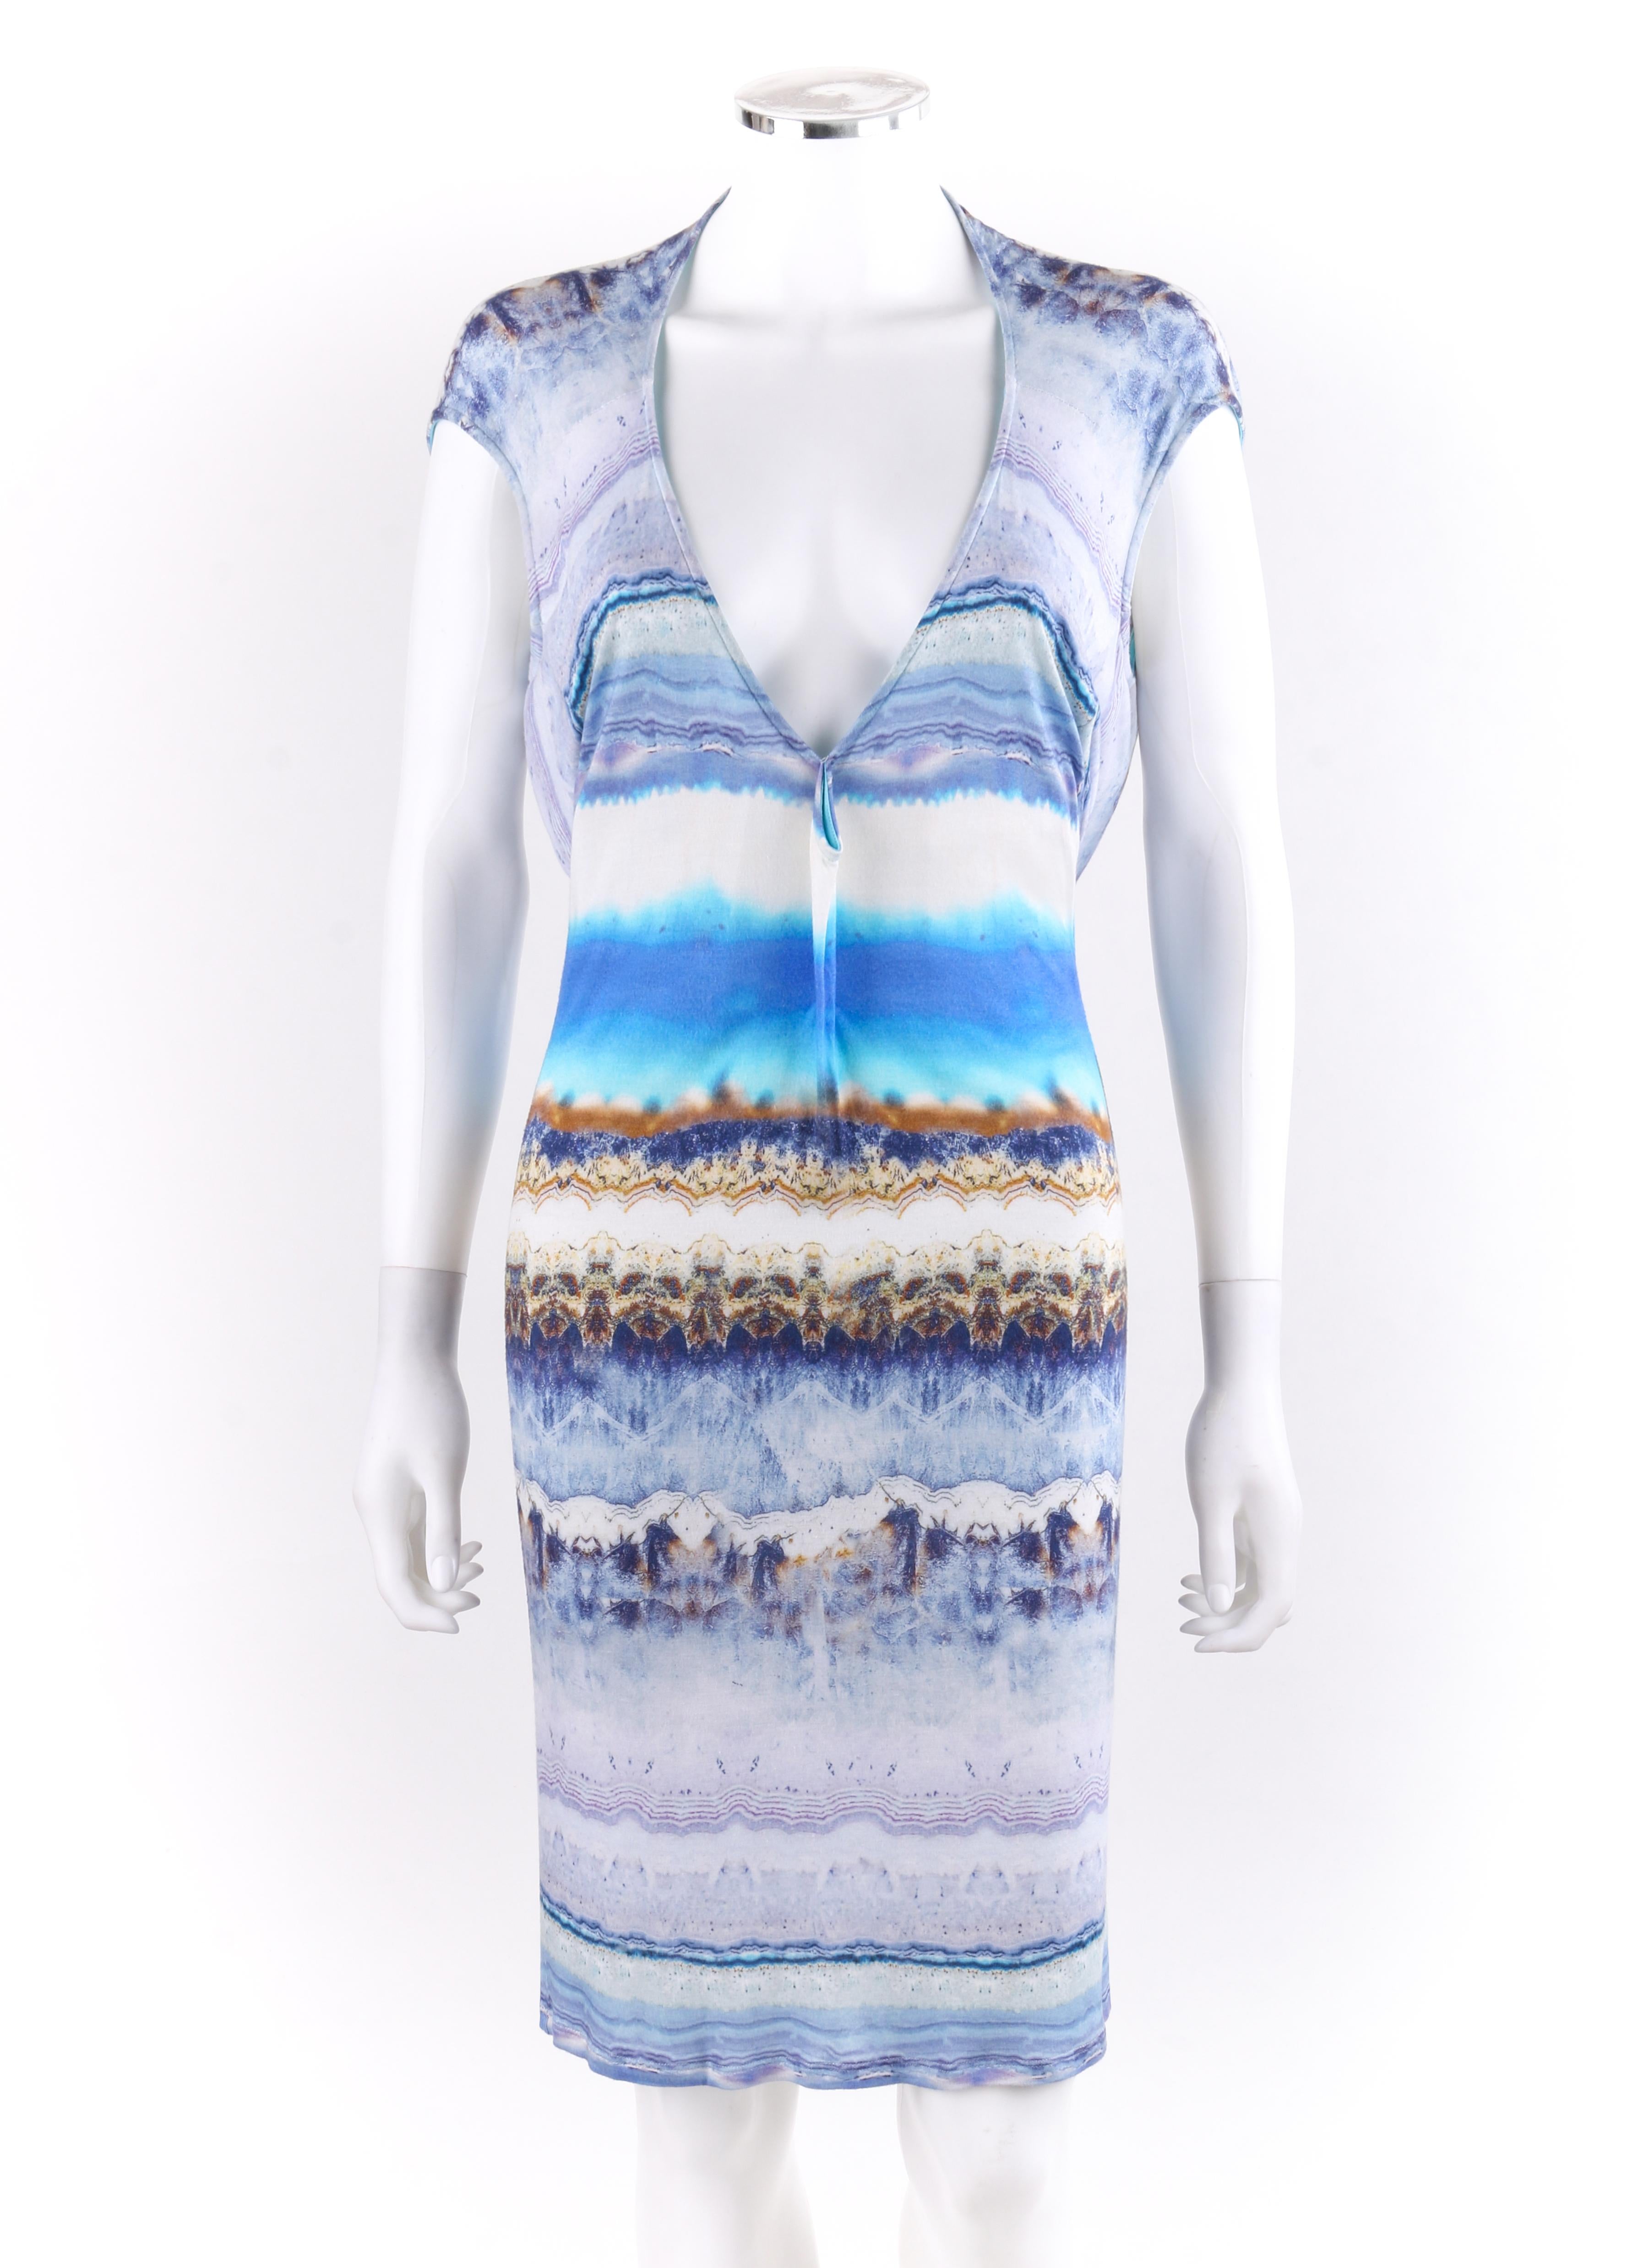 ALEXANDER McQUEEN Resort 2010 Agate Watercolor Geode Print Jersey Knit Body-Con Dress 
 
Brand / Manufacturer: Alexander McQueen 
Collection: Resort 2010
Style: Body-Con dress
Color(s): Shades of brown, off-white, grey, blue and purple. 
Lined: